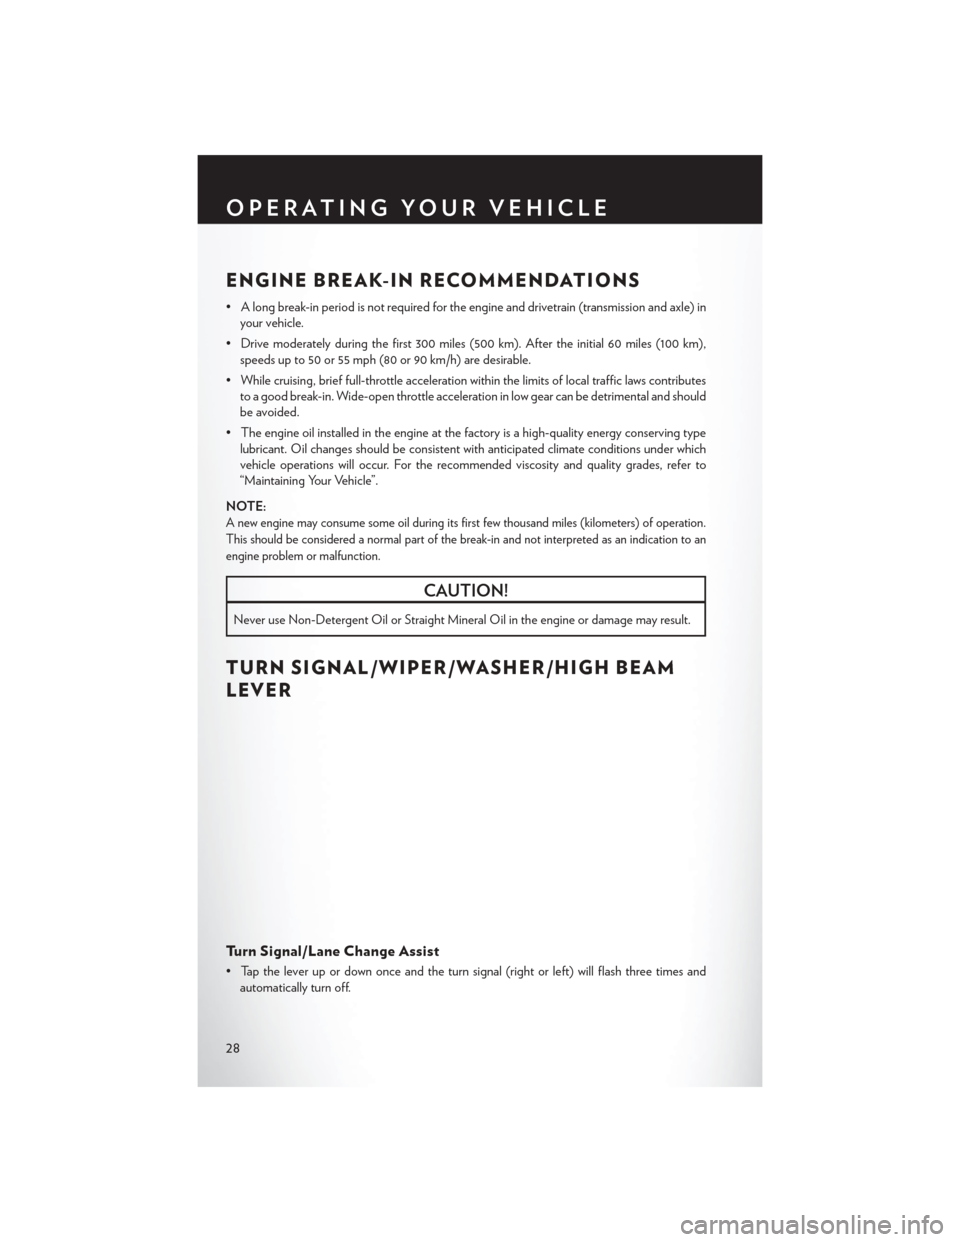 CHRYSLER TOWN AND COUNTRY 2013 5.G User Guide ENGINE BREAK-IN RECOMMENDATIONS
• A long break-in period is not required for the engine and drivetrain (transmission and axle) inyour vehicle.
• Drive moderately during the first 300 miles (500 km